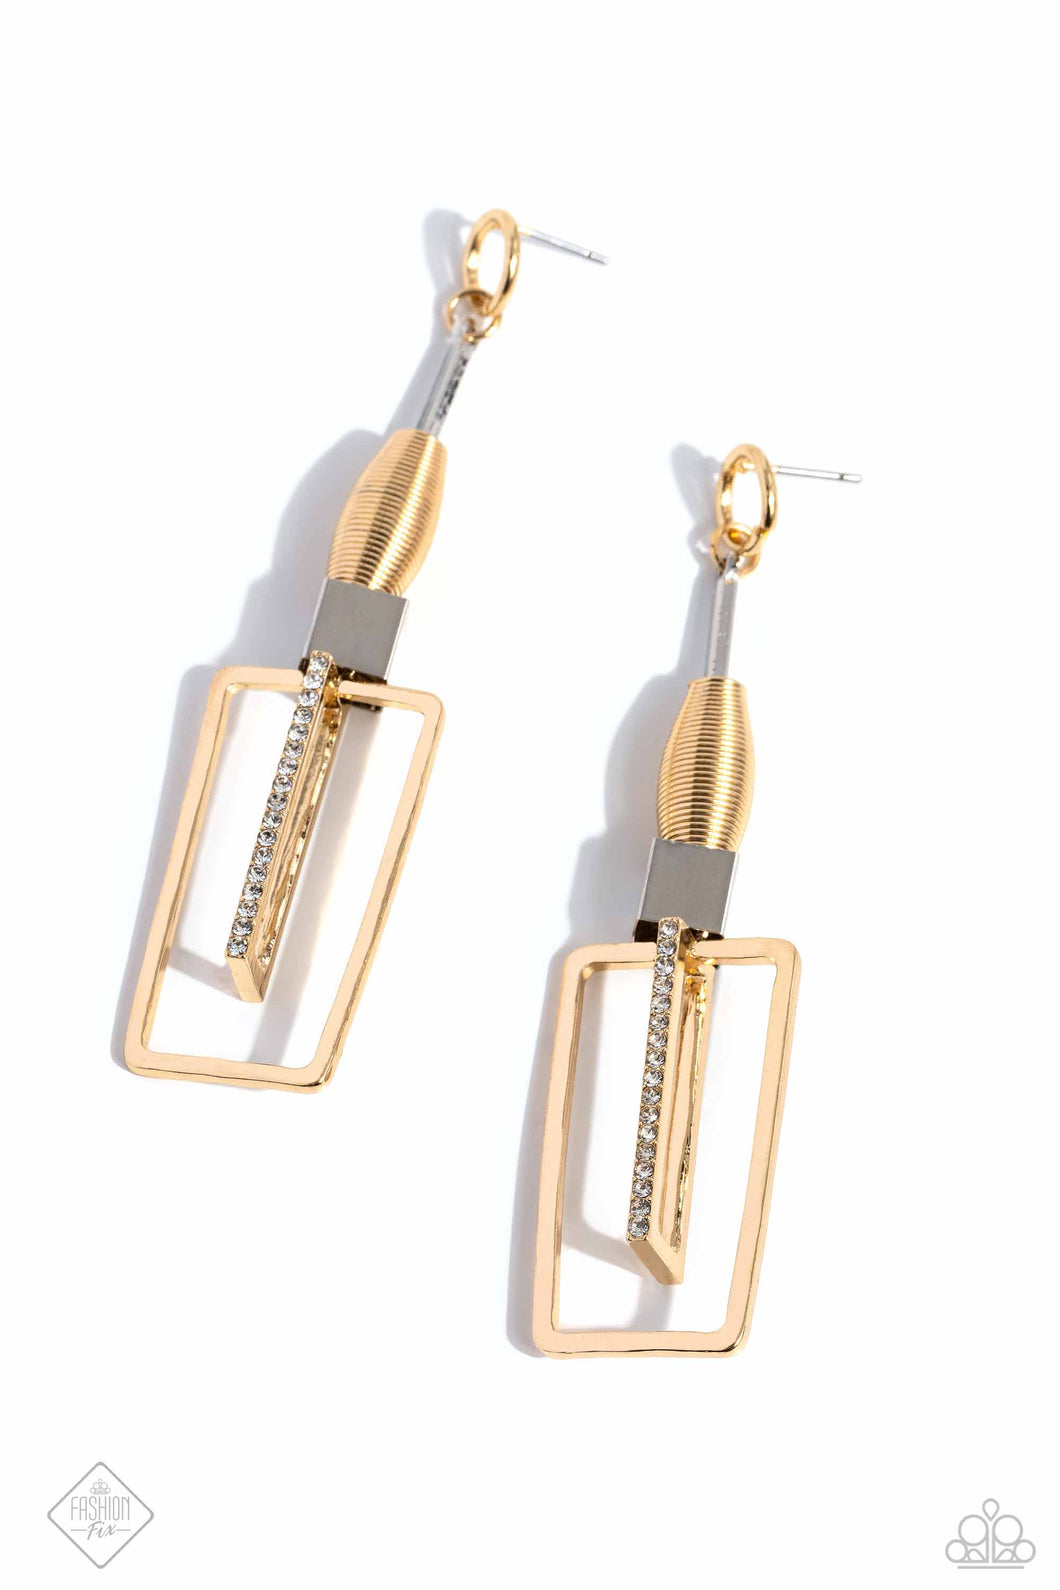 Clear the SQUARE - Gold (Mixed Metals) Earrings